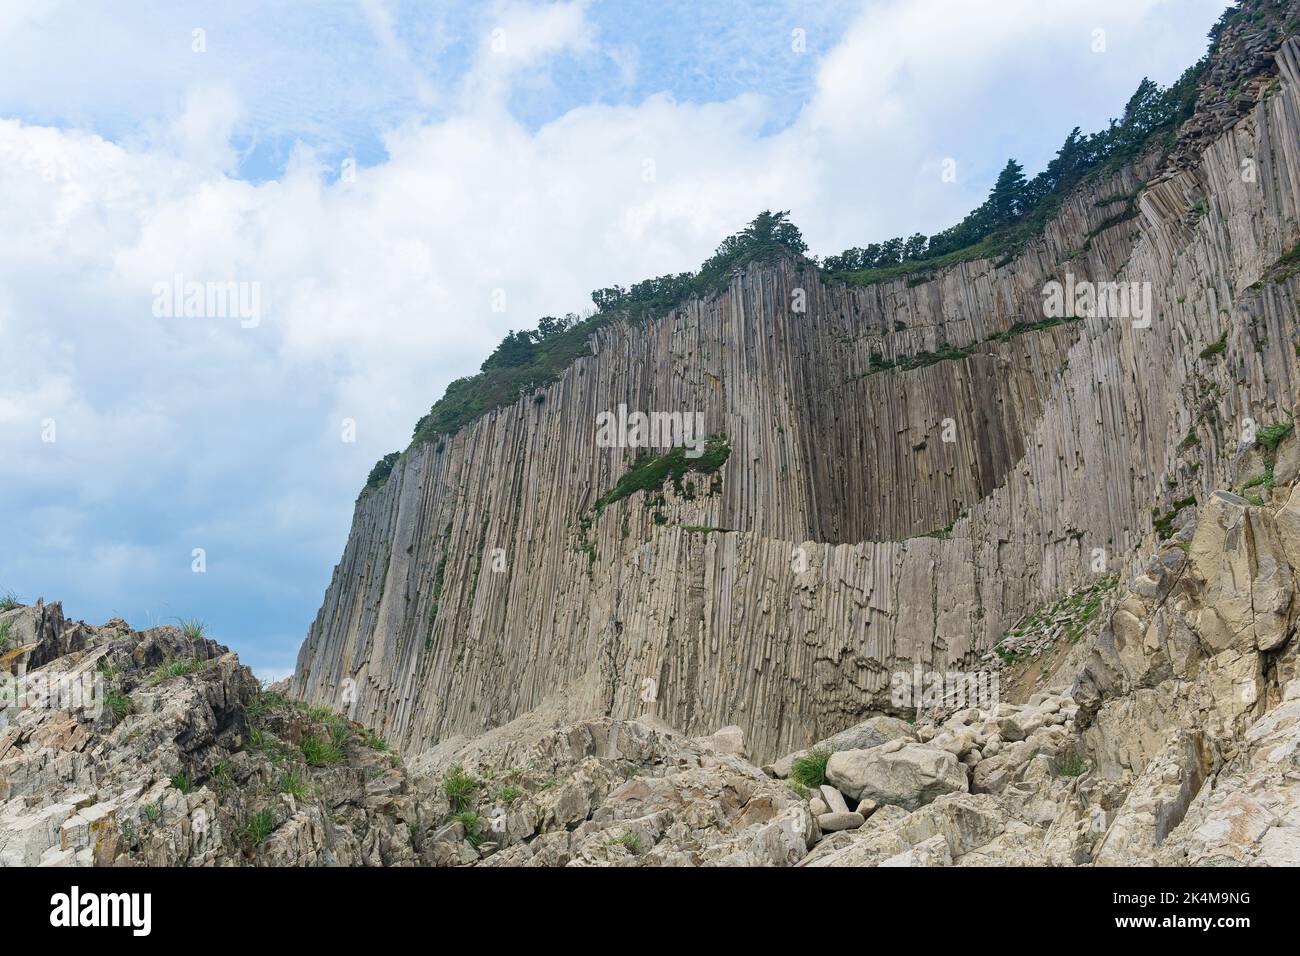 high coastal cliff formed by solidified lava stone columns, Cape Stolbchaty on Kunashir island Stock Photo